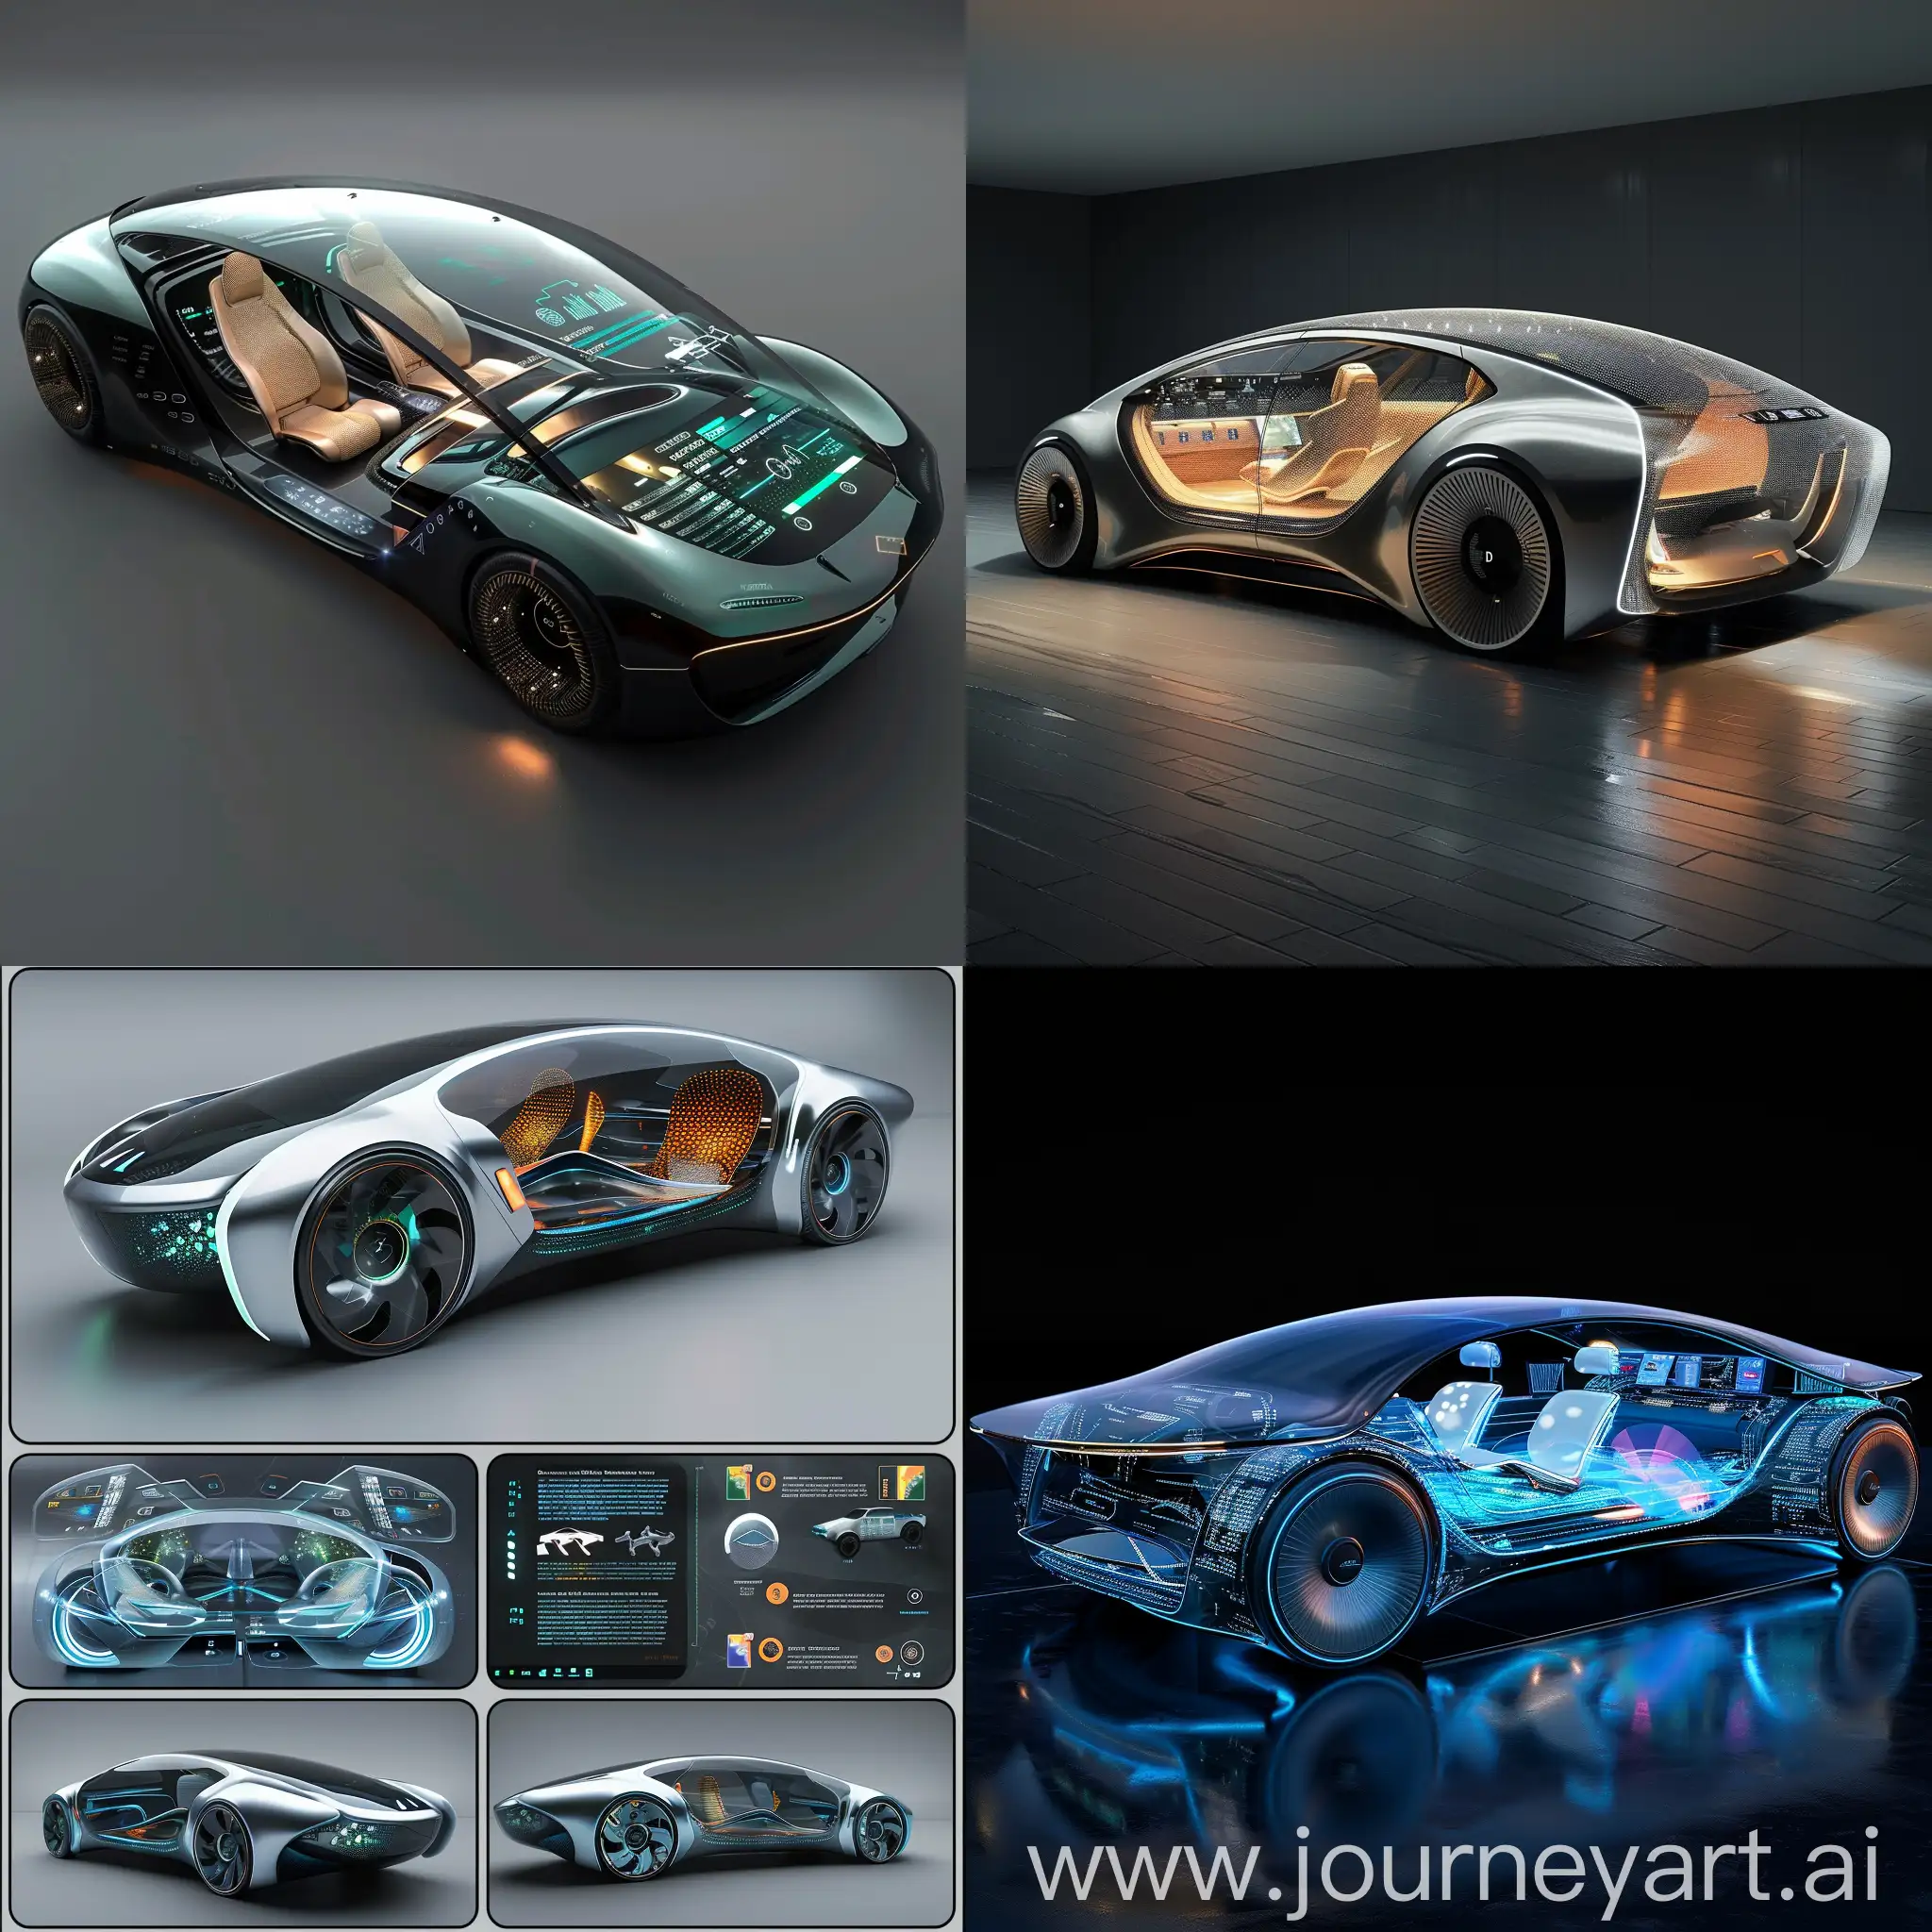 Futuristic car, 2055 world, Adaptive AI Interior, Augmented Reality Dashboards, Self-Healing Materials, Biometric Access and Control, Holographic Displays, Health Monitoring Systems, Modular Interior Configurations, Transparent OLED Panels, Advanced Noise Cancellation, Smart Fabric and Materials, Self-Healing Paint and Body Panels, Dynamic Shape-Shifting Aerodynamics, Integrated Solar Panels, Active Surface Textures, Advanced Sensor Arrays, Color-Changing Exteriors, Holographic Projectors, Adaptive Lighting Systems, Magnetic Levitation Wheels, Integrated Drone Systems, unreal engine 5 --stylize 1000